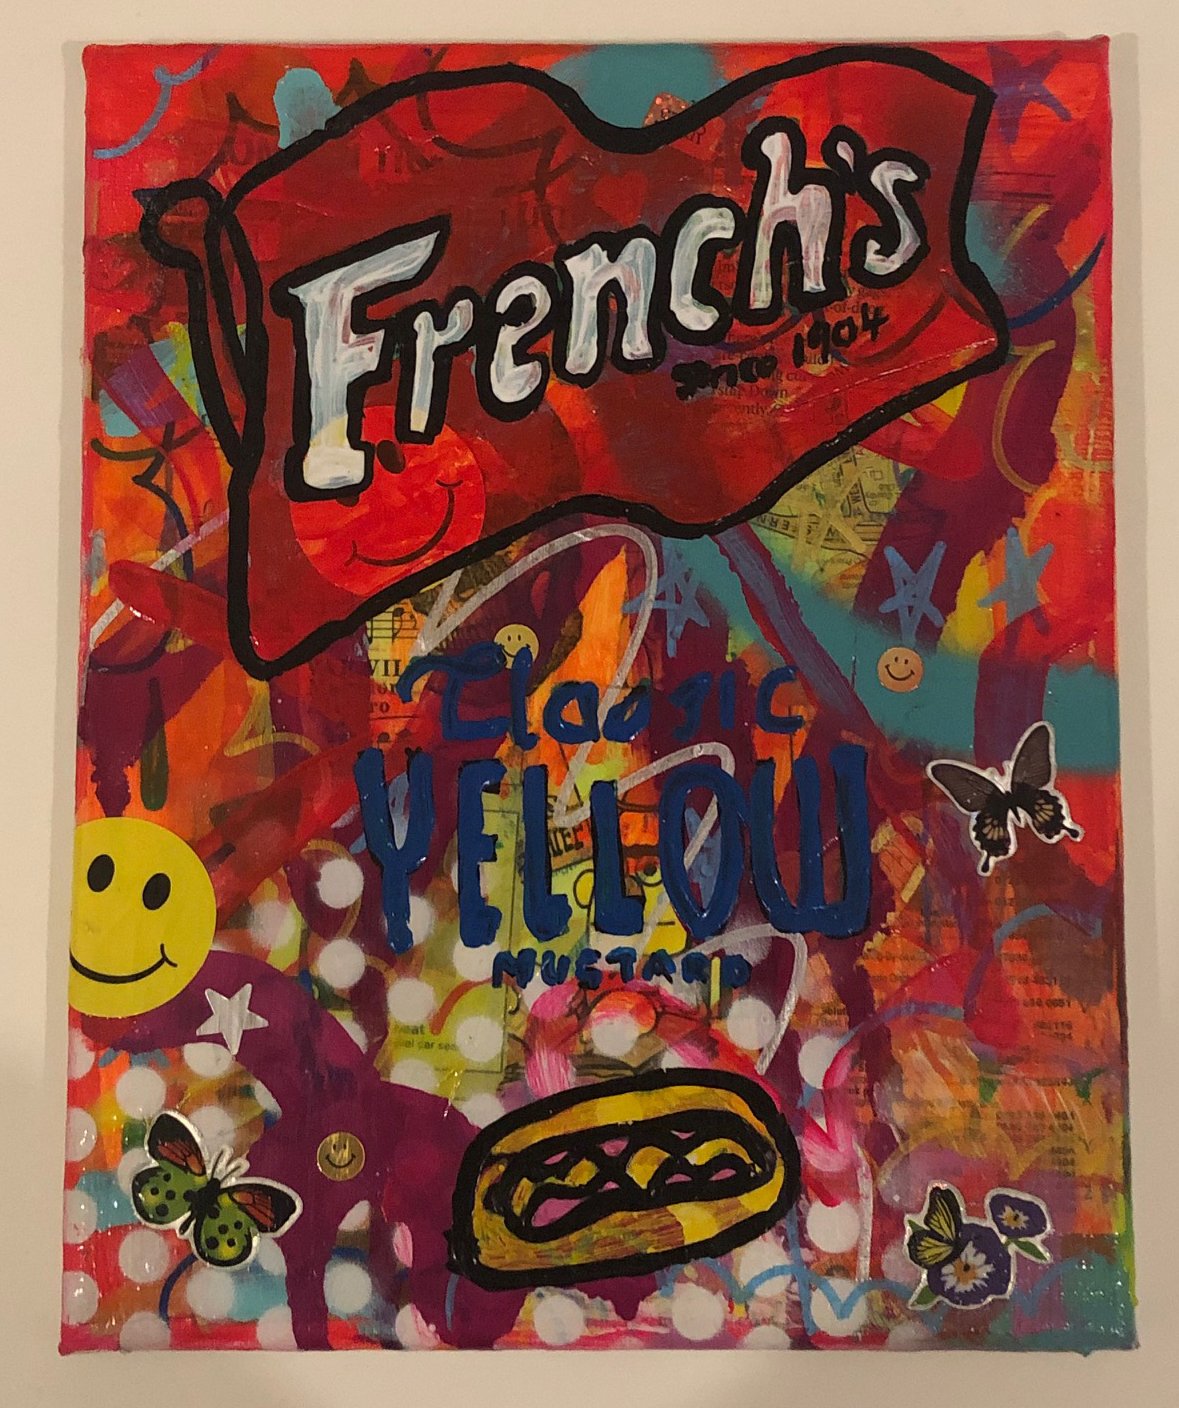 I wanna be your hot dog by Barrie J Davies 2019, Mixed media on Canvas, 20cm x 25cm, Unframed. Barrie J Davies is an Artist - Pop Art and Street art inspired Artist based in Brighton England UK - Pop Art Paintings, Street Art Prints & Editions available.